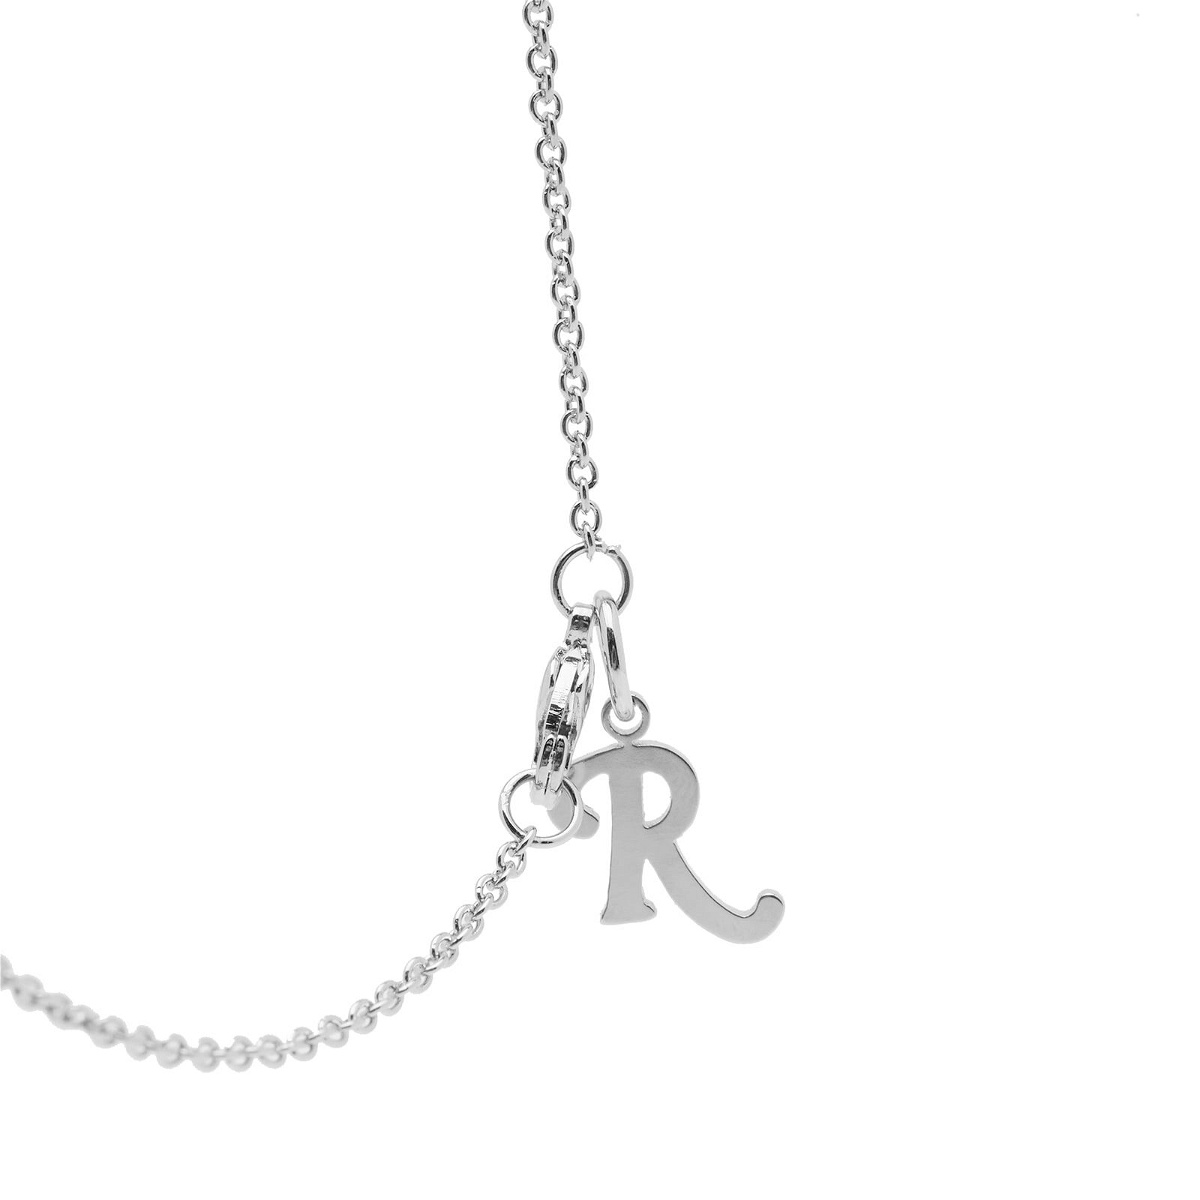 Raf Simons Men's Small Key On Hanger Necklace in Antique Silver Raf Simons